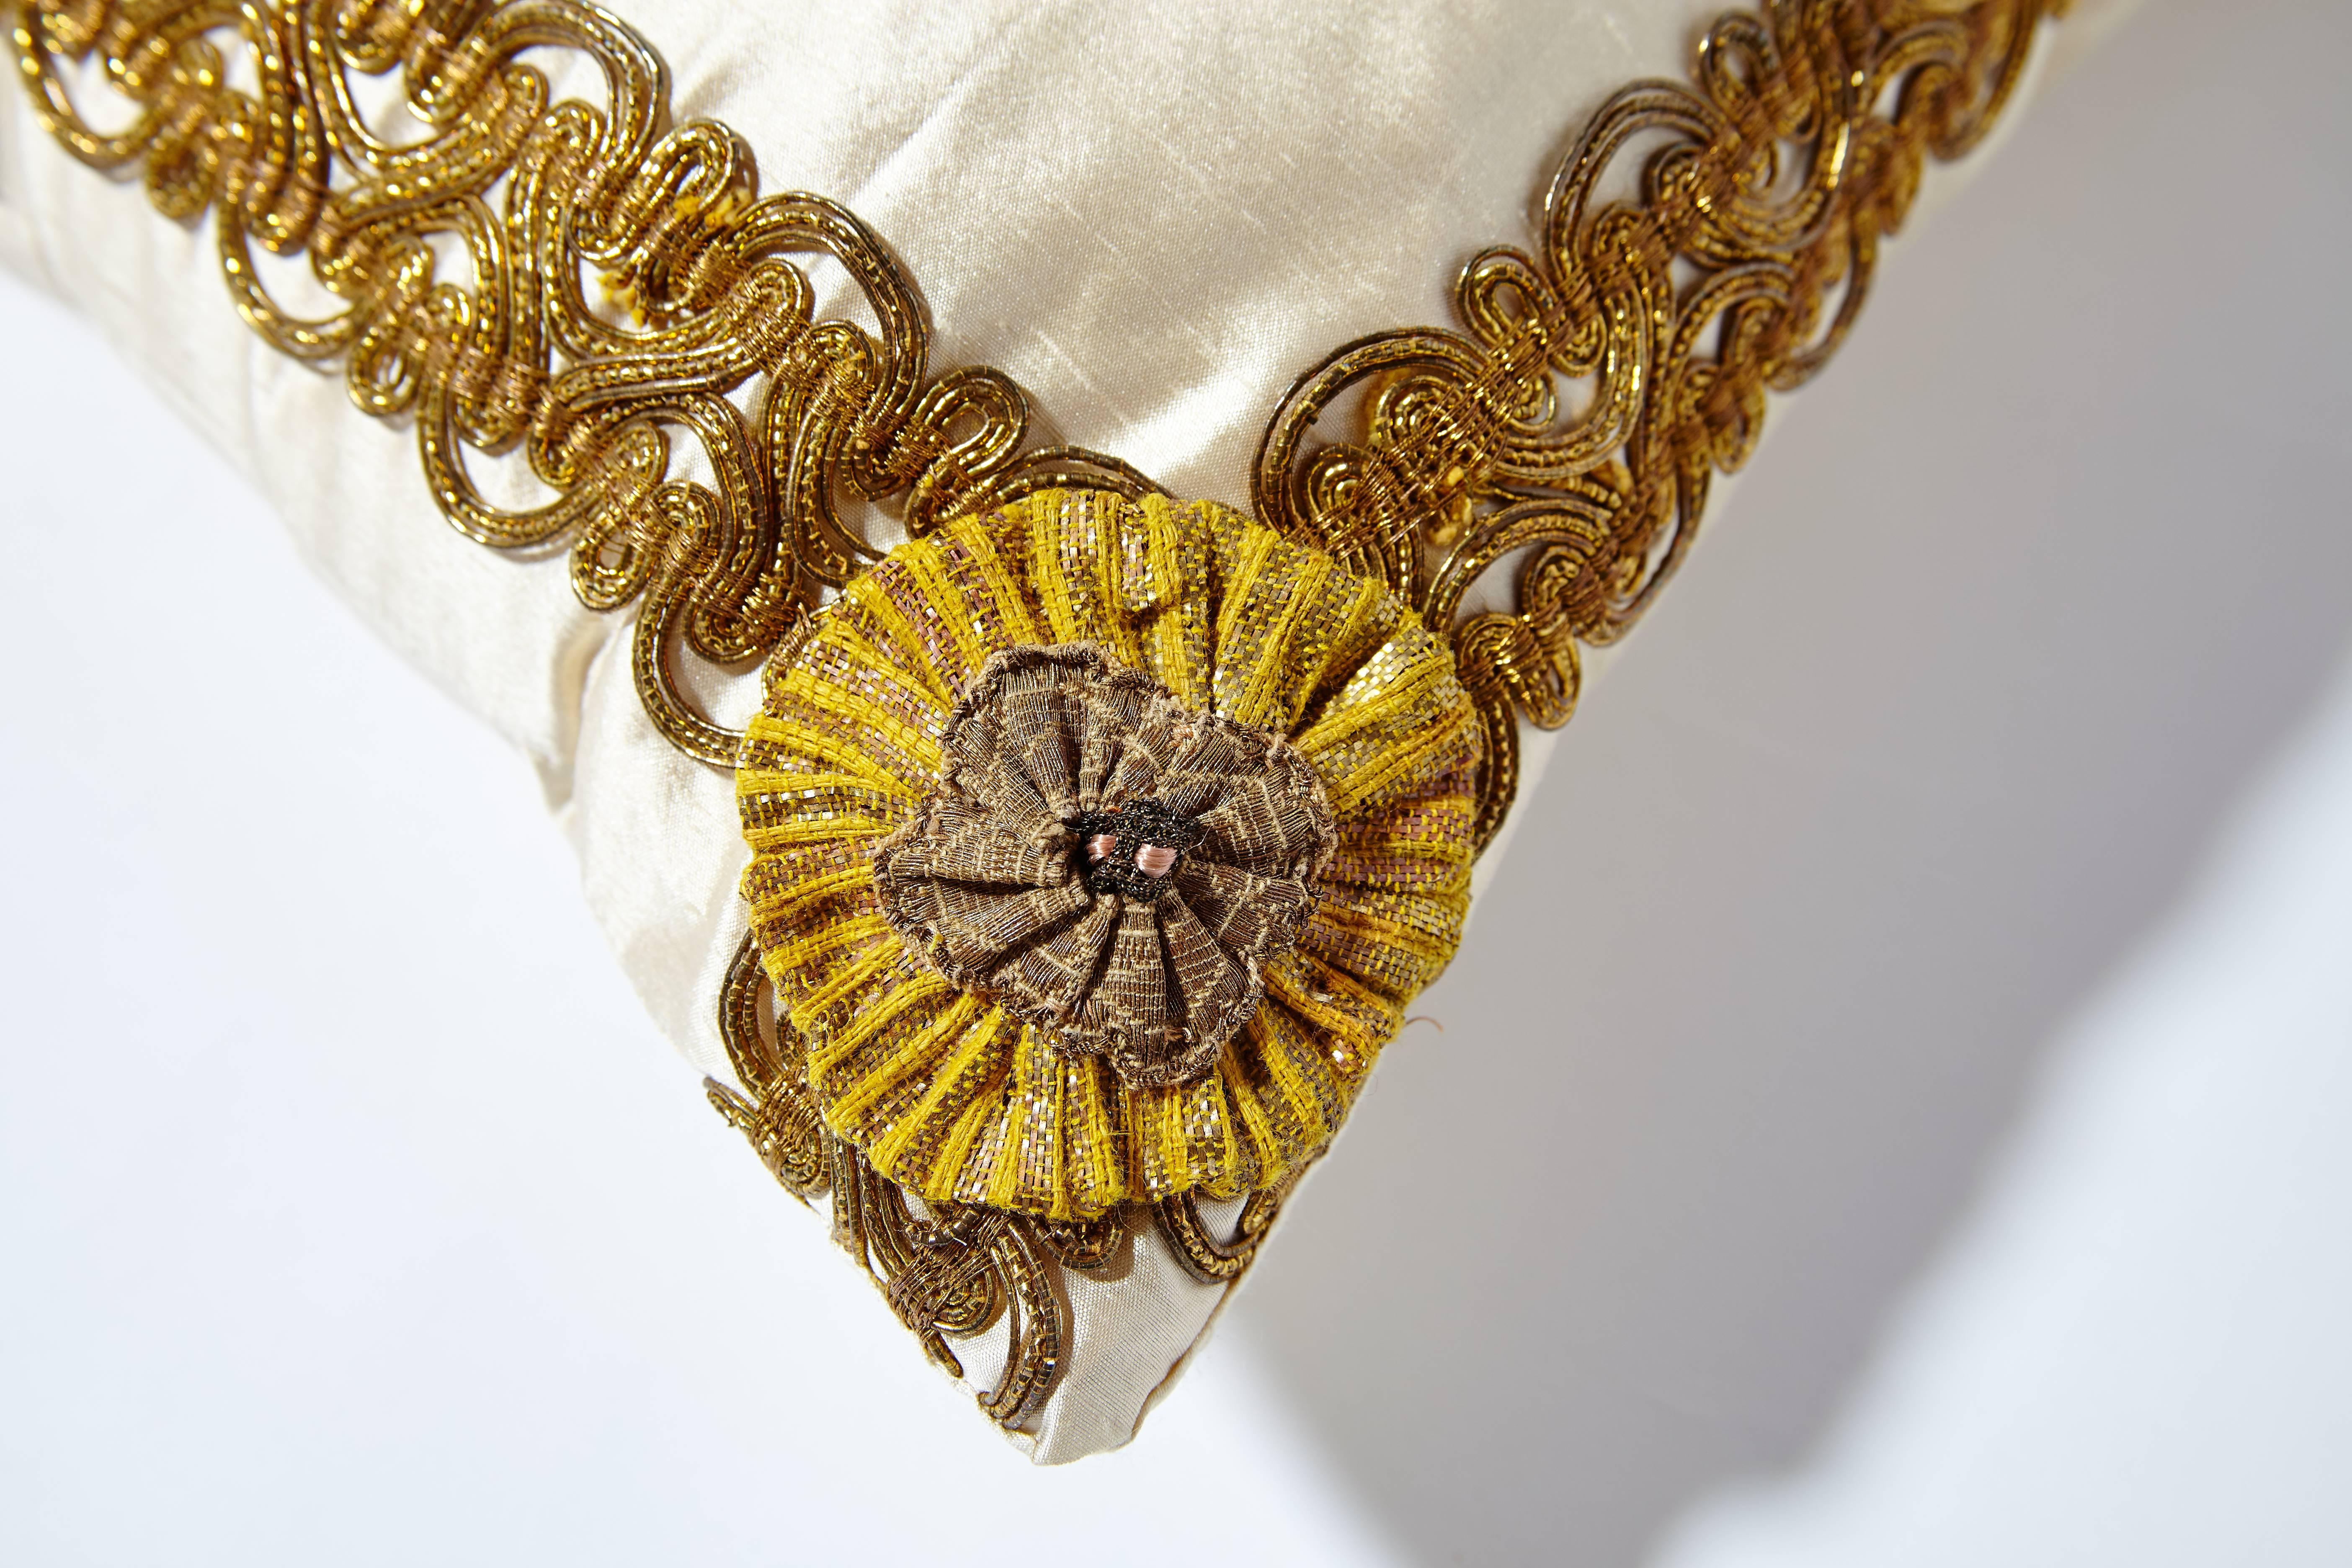 18th century Italian fragment of brocaded lampas in silk and gold thread representing polychrome flowers. The beautifully ornate concentric frames of trim is a rare 19th century Italian galloon (trim) and each corner is embellished with handmade